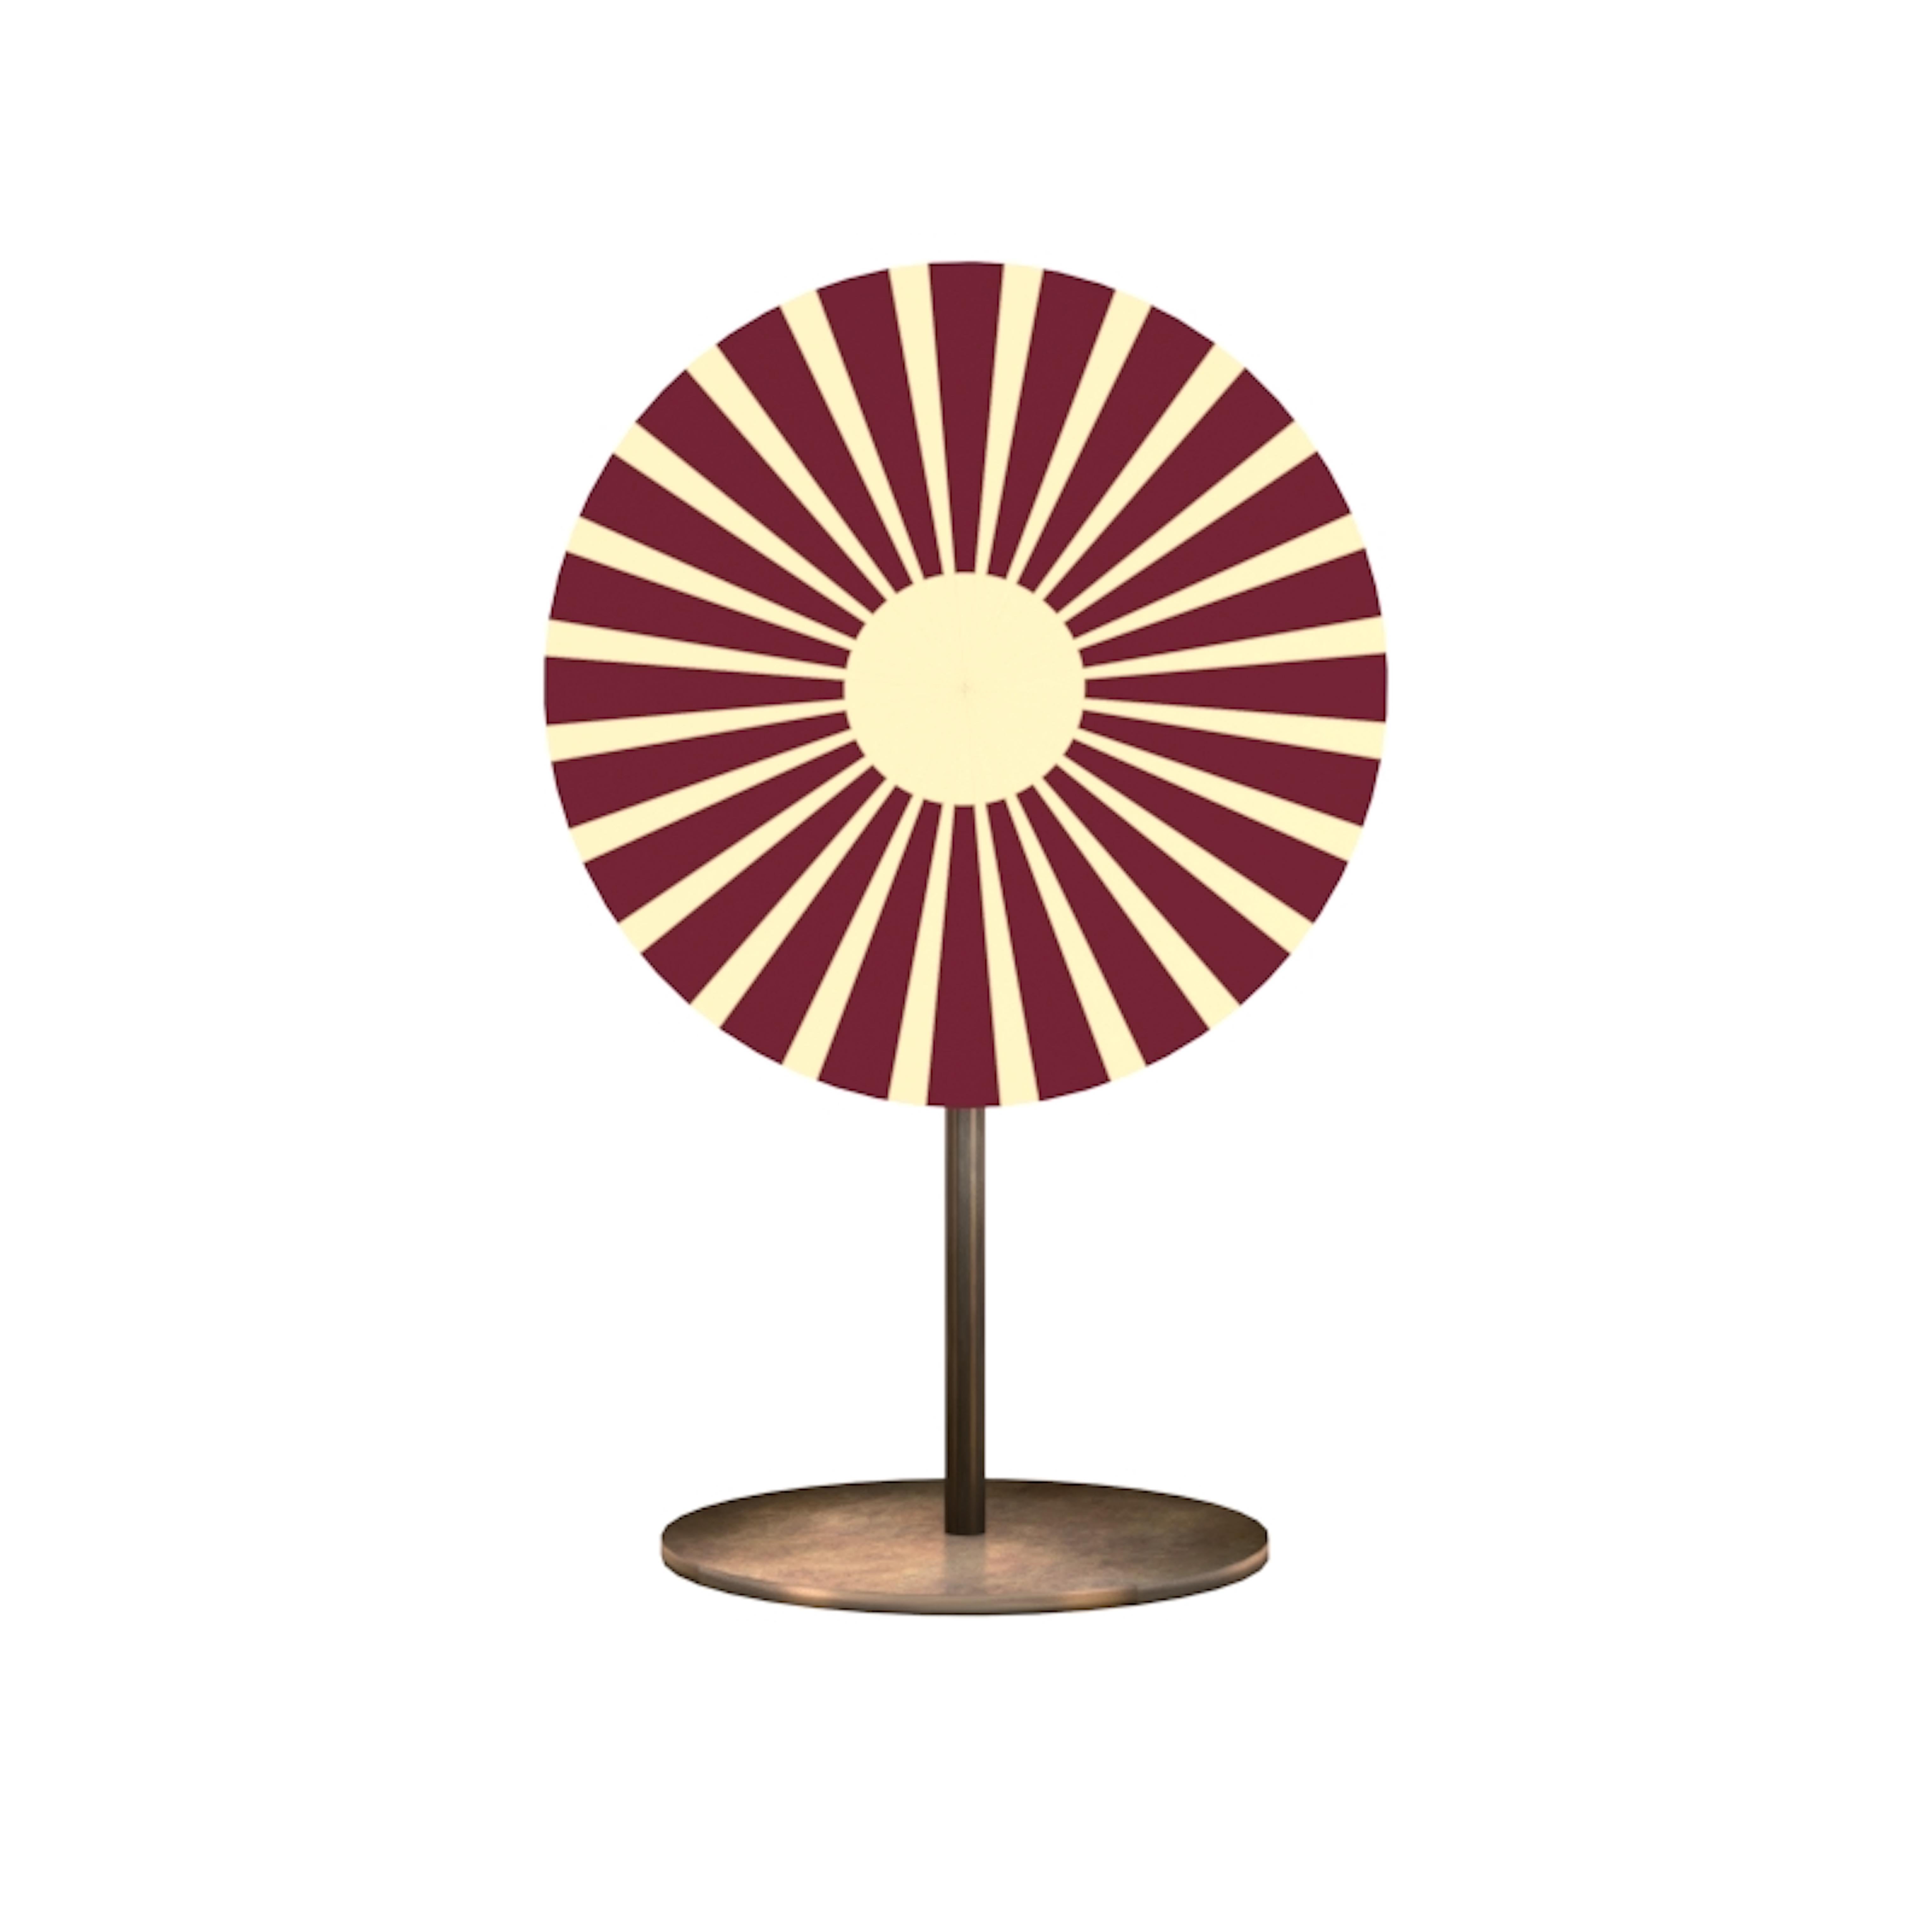 Paris Table Mirror Burgundy by Matteo Cibic is a small table mirror. It is available in a range of colors, which can be customized according to the space.

India's handicrafts are as multifarious as its cultures, and as rich as its history. The art